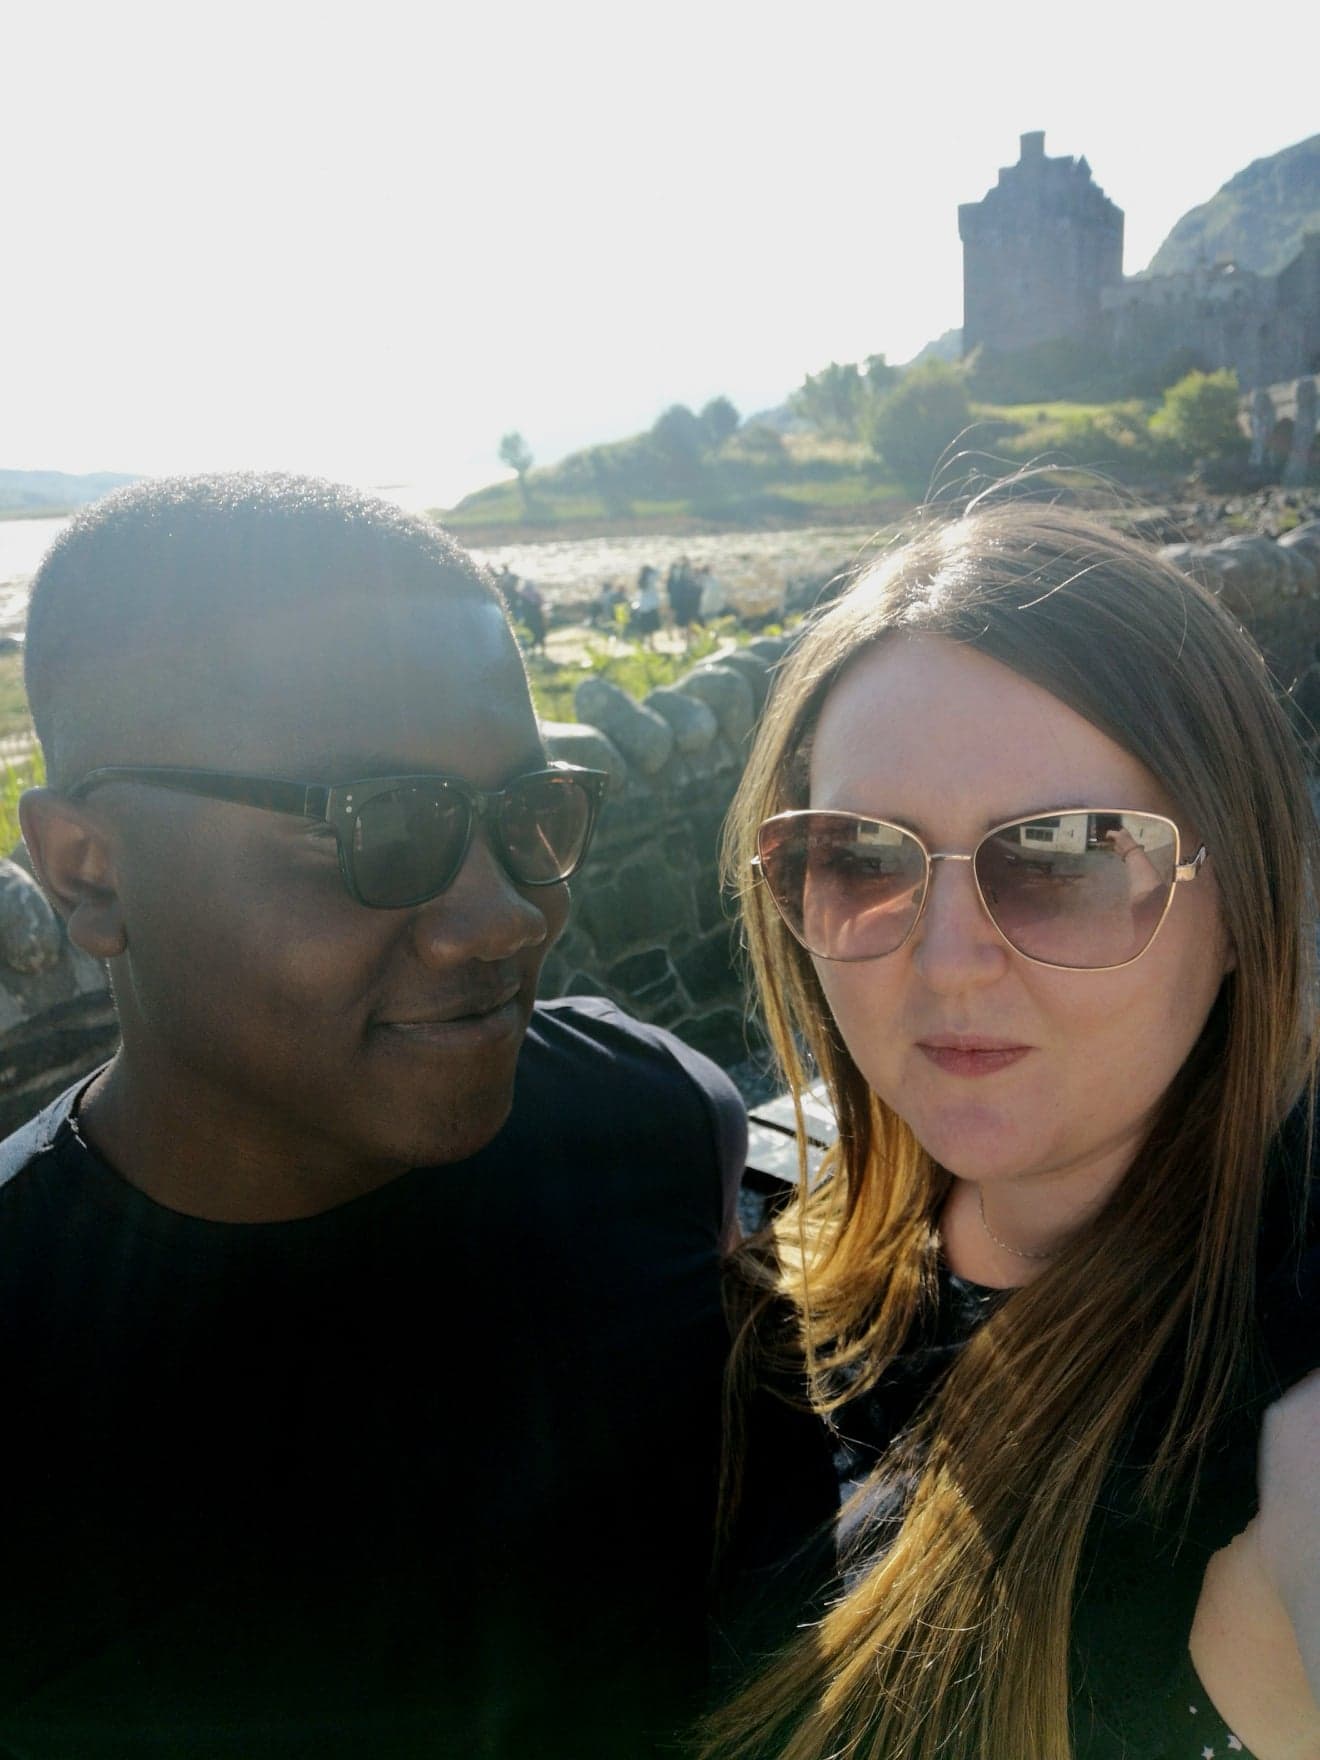 Laura and Emmanuel during a long trip  week long trip to the Isle of Skye in August 2021.